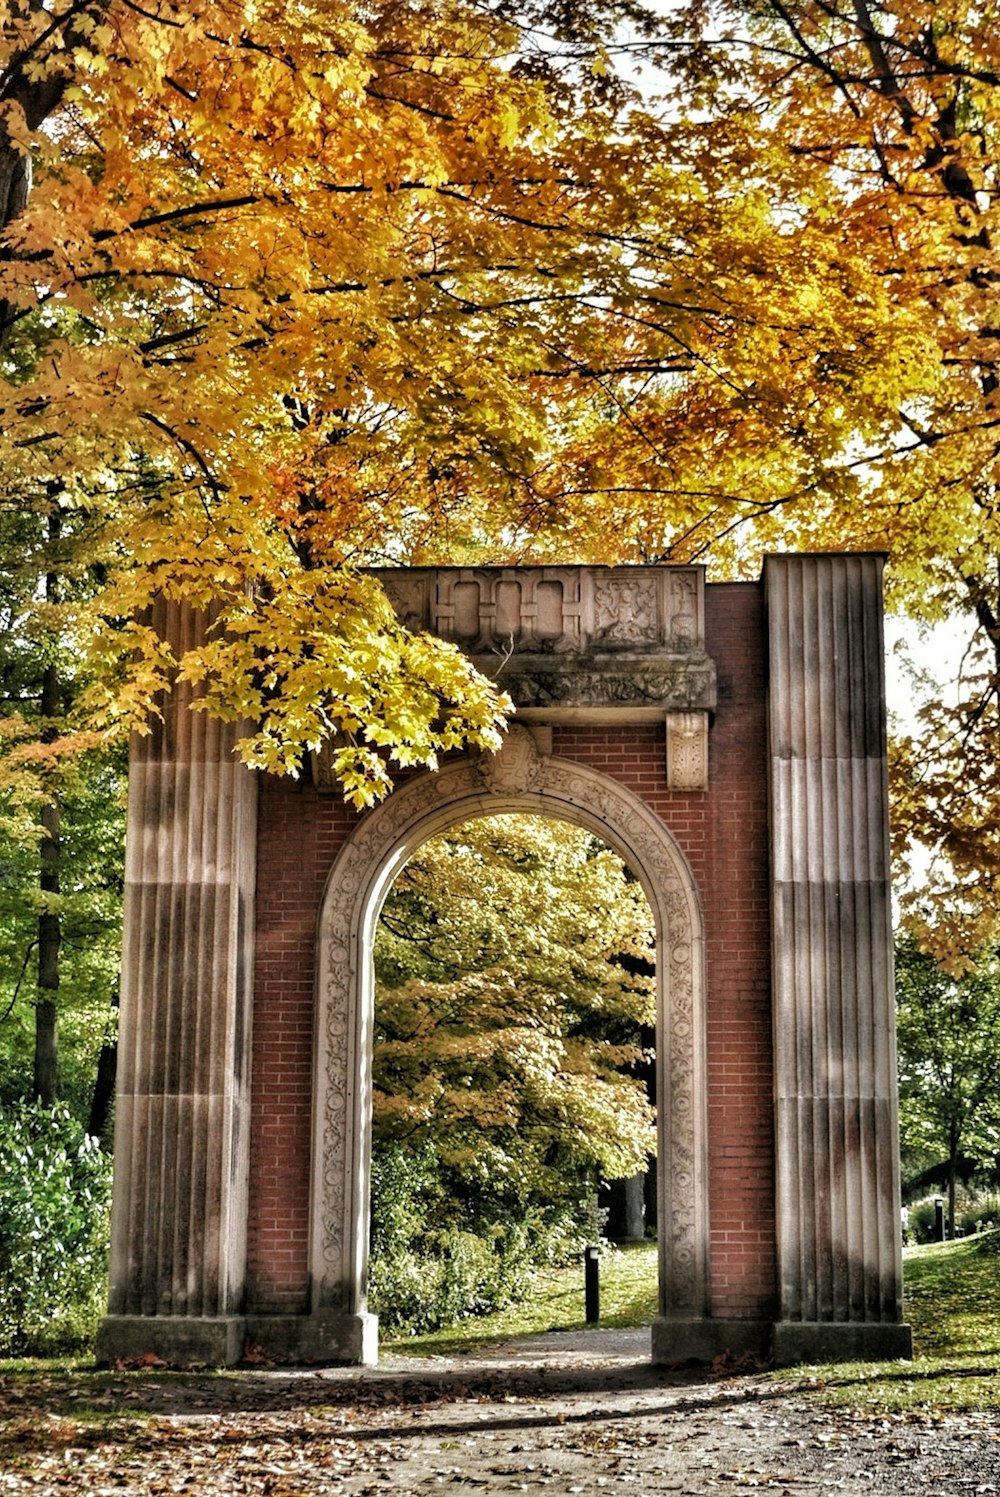 a stone arch in a park surrounded by trees